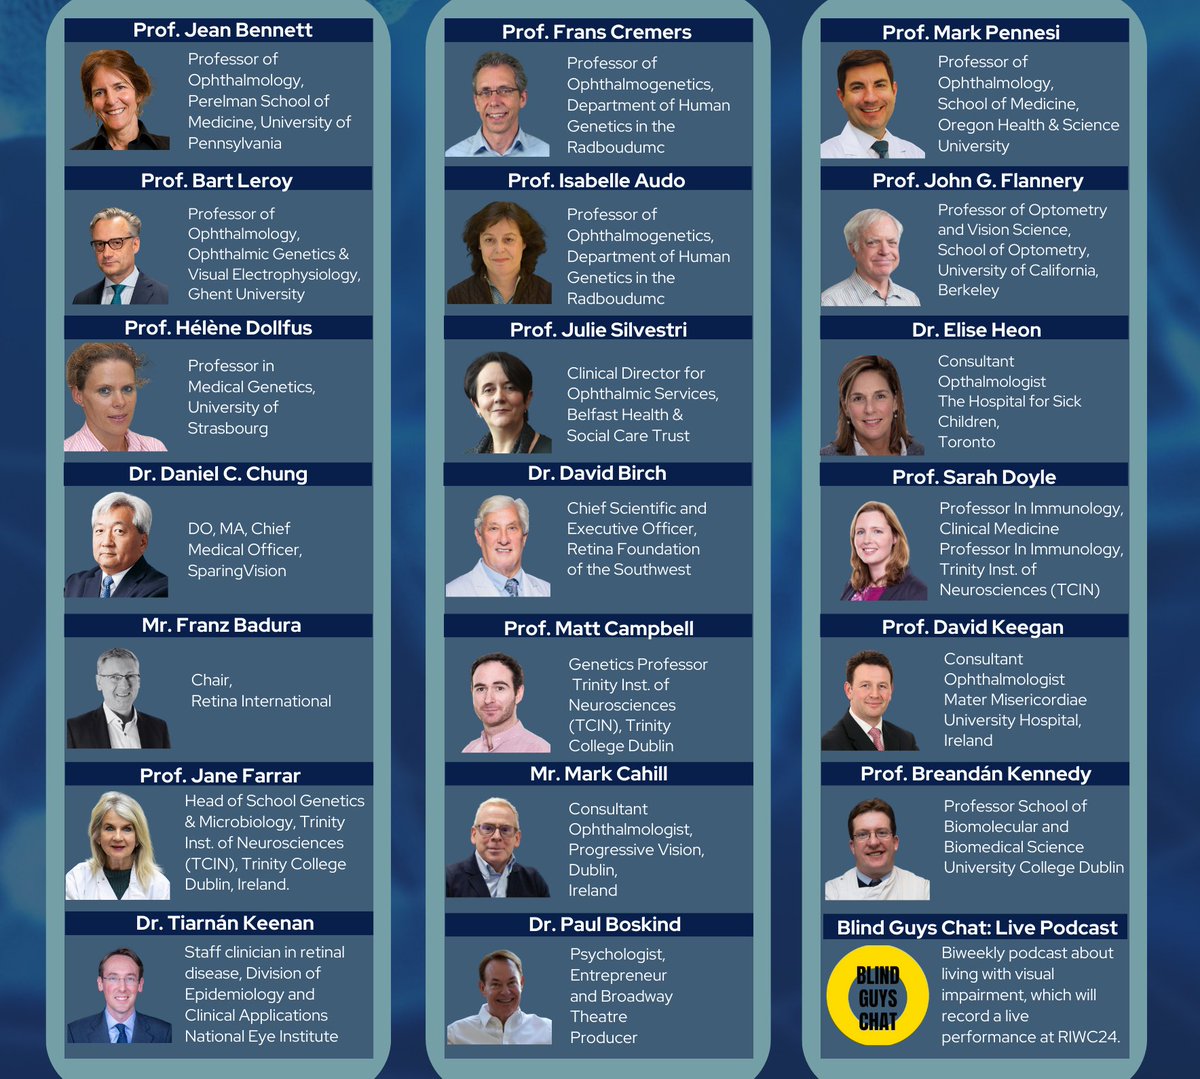 We're excited to share the lineup of impressive speakers for #RIWC24: bit.ly/3UtKPS6 Don't miss out on this incredible opportunity to be in the same room as the best in #Retinal research and advocacy. Even more to follow, stay tuned! @Retina_Int @fight_blindness